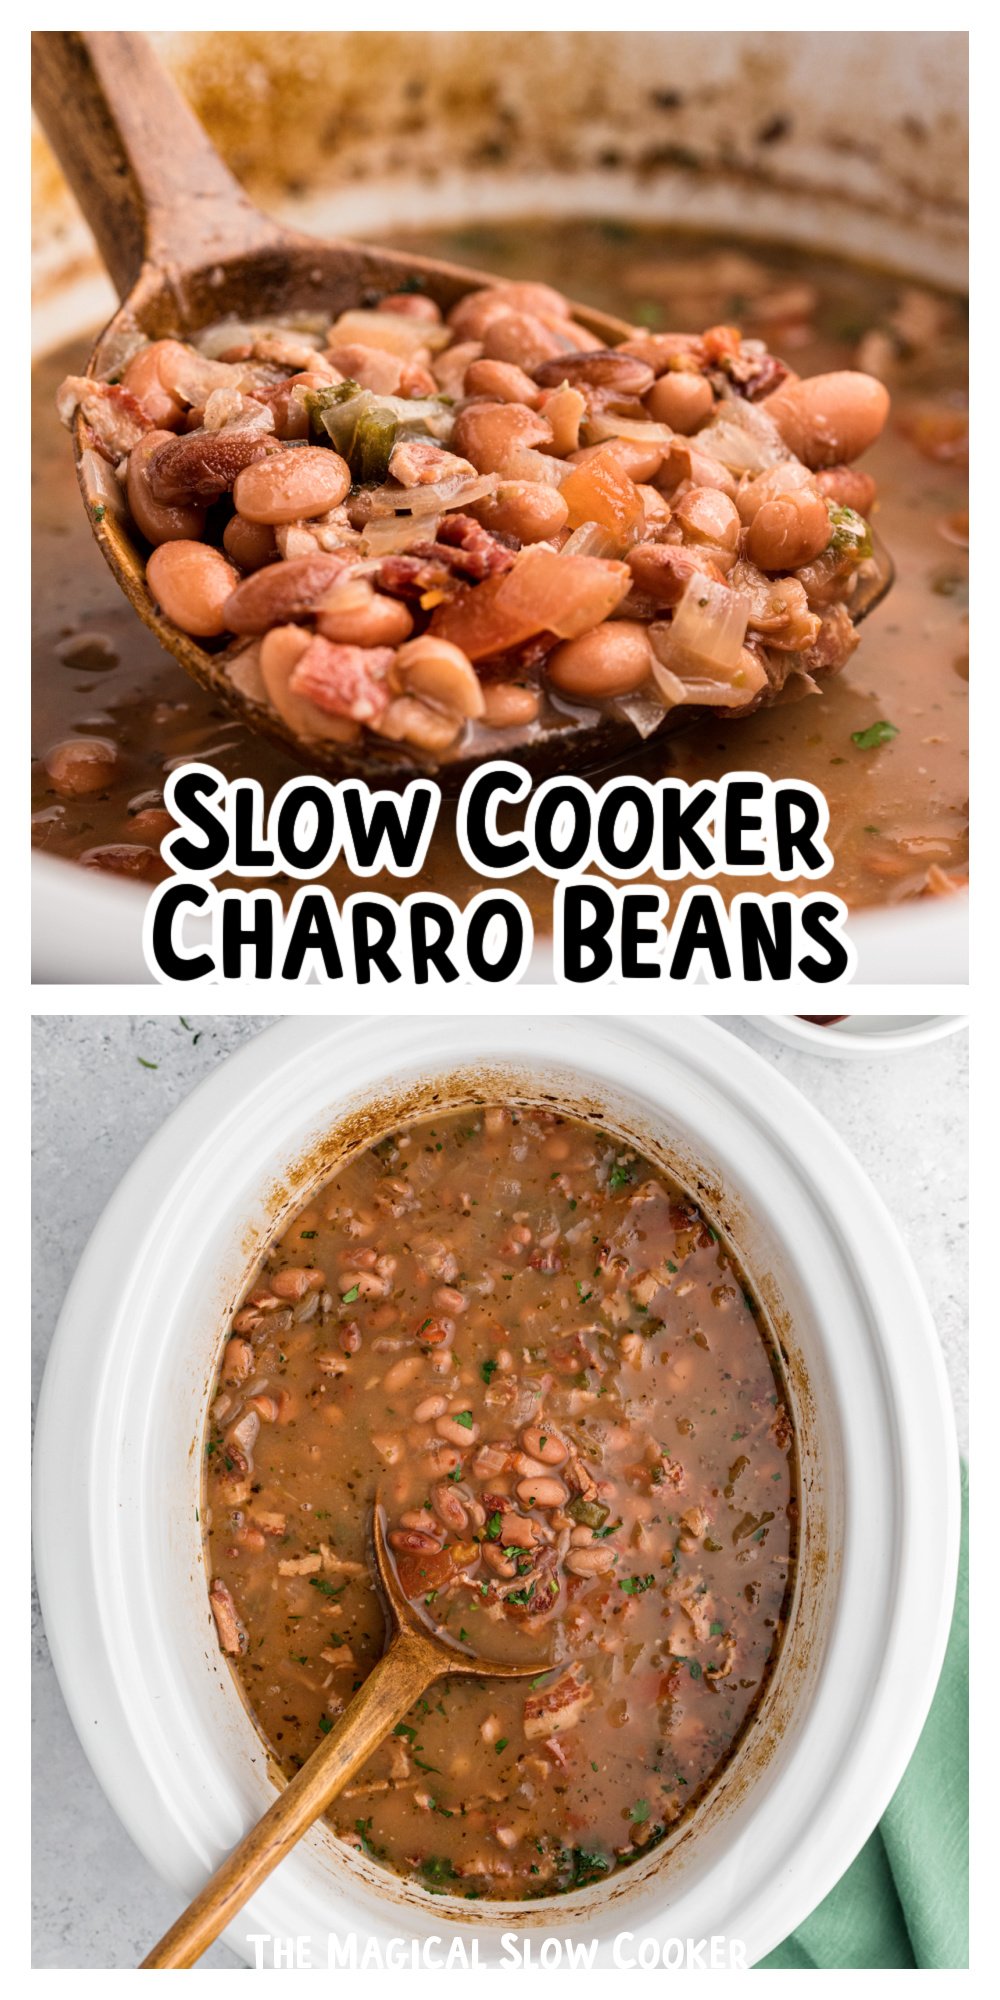 Slow Cooker Charro Beans - The Magical Slow Cooker